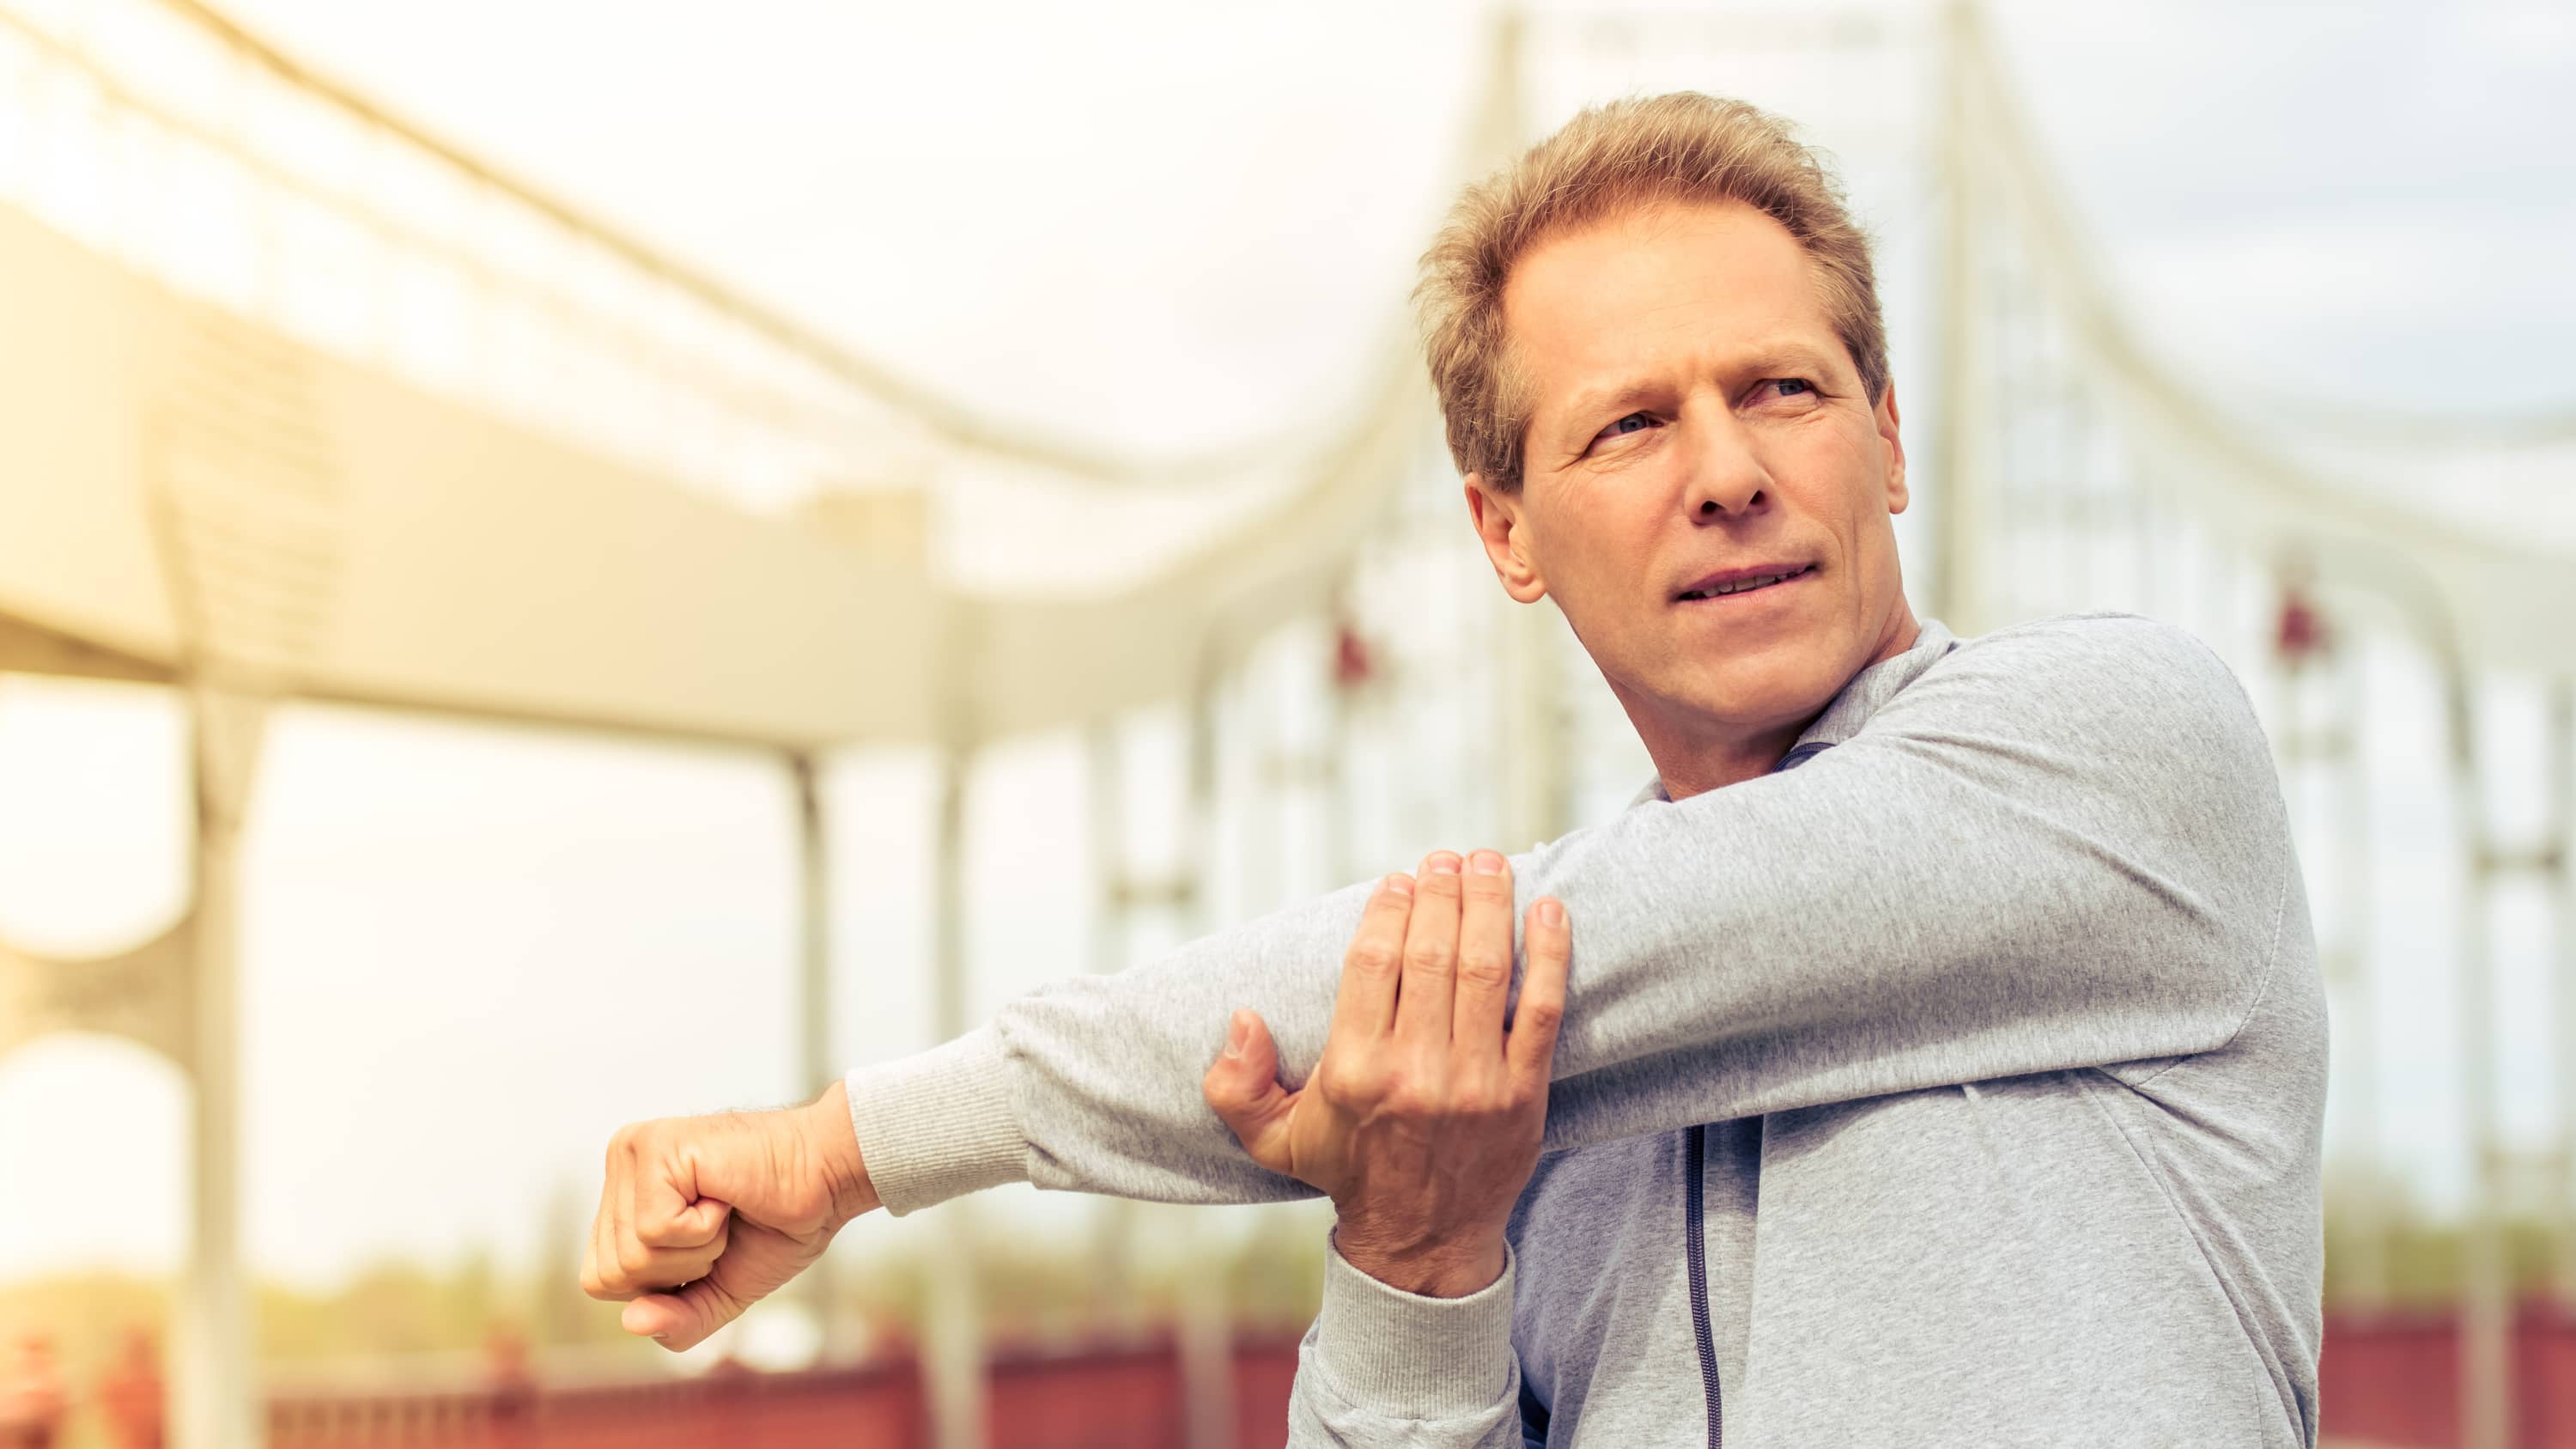 Man stretching before workout, possibly after receiving body-contouring surgery